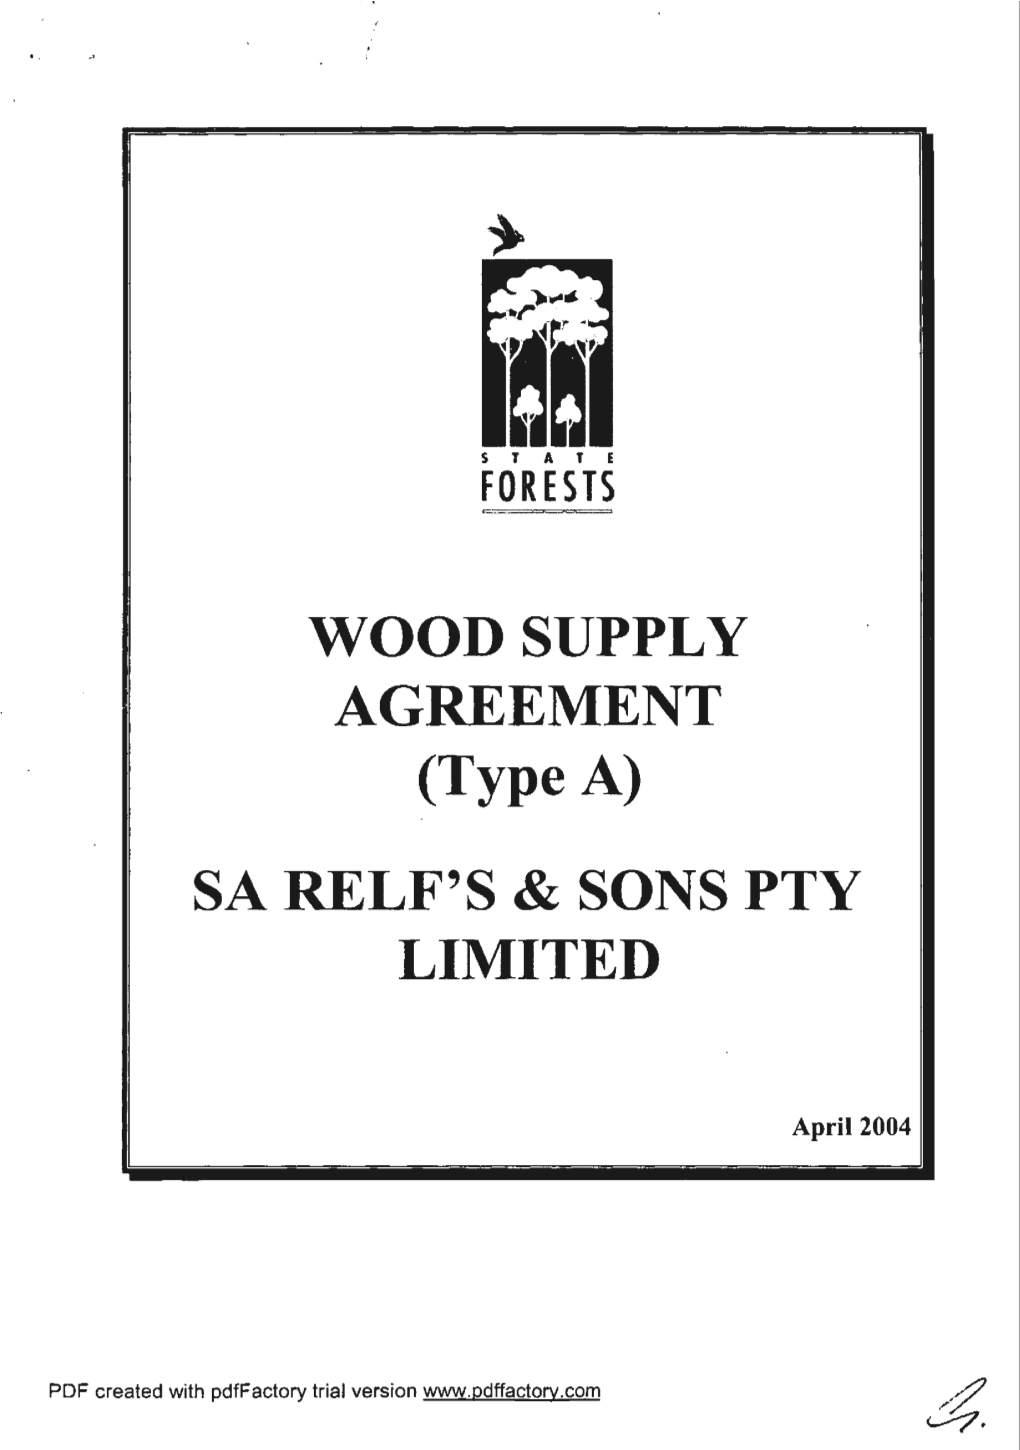 WOOD SUPPLY AGREEMENT (Type A) SA RELF's & SONS PTY LIMITED